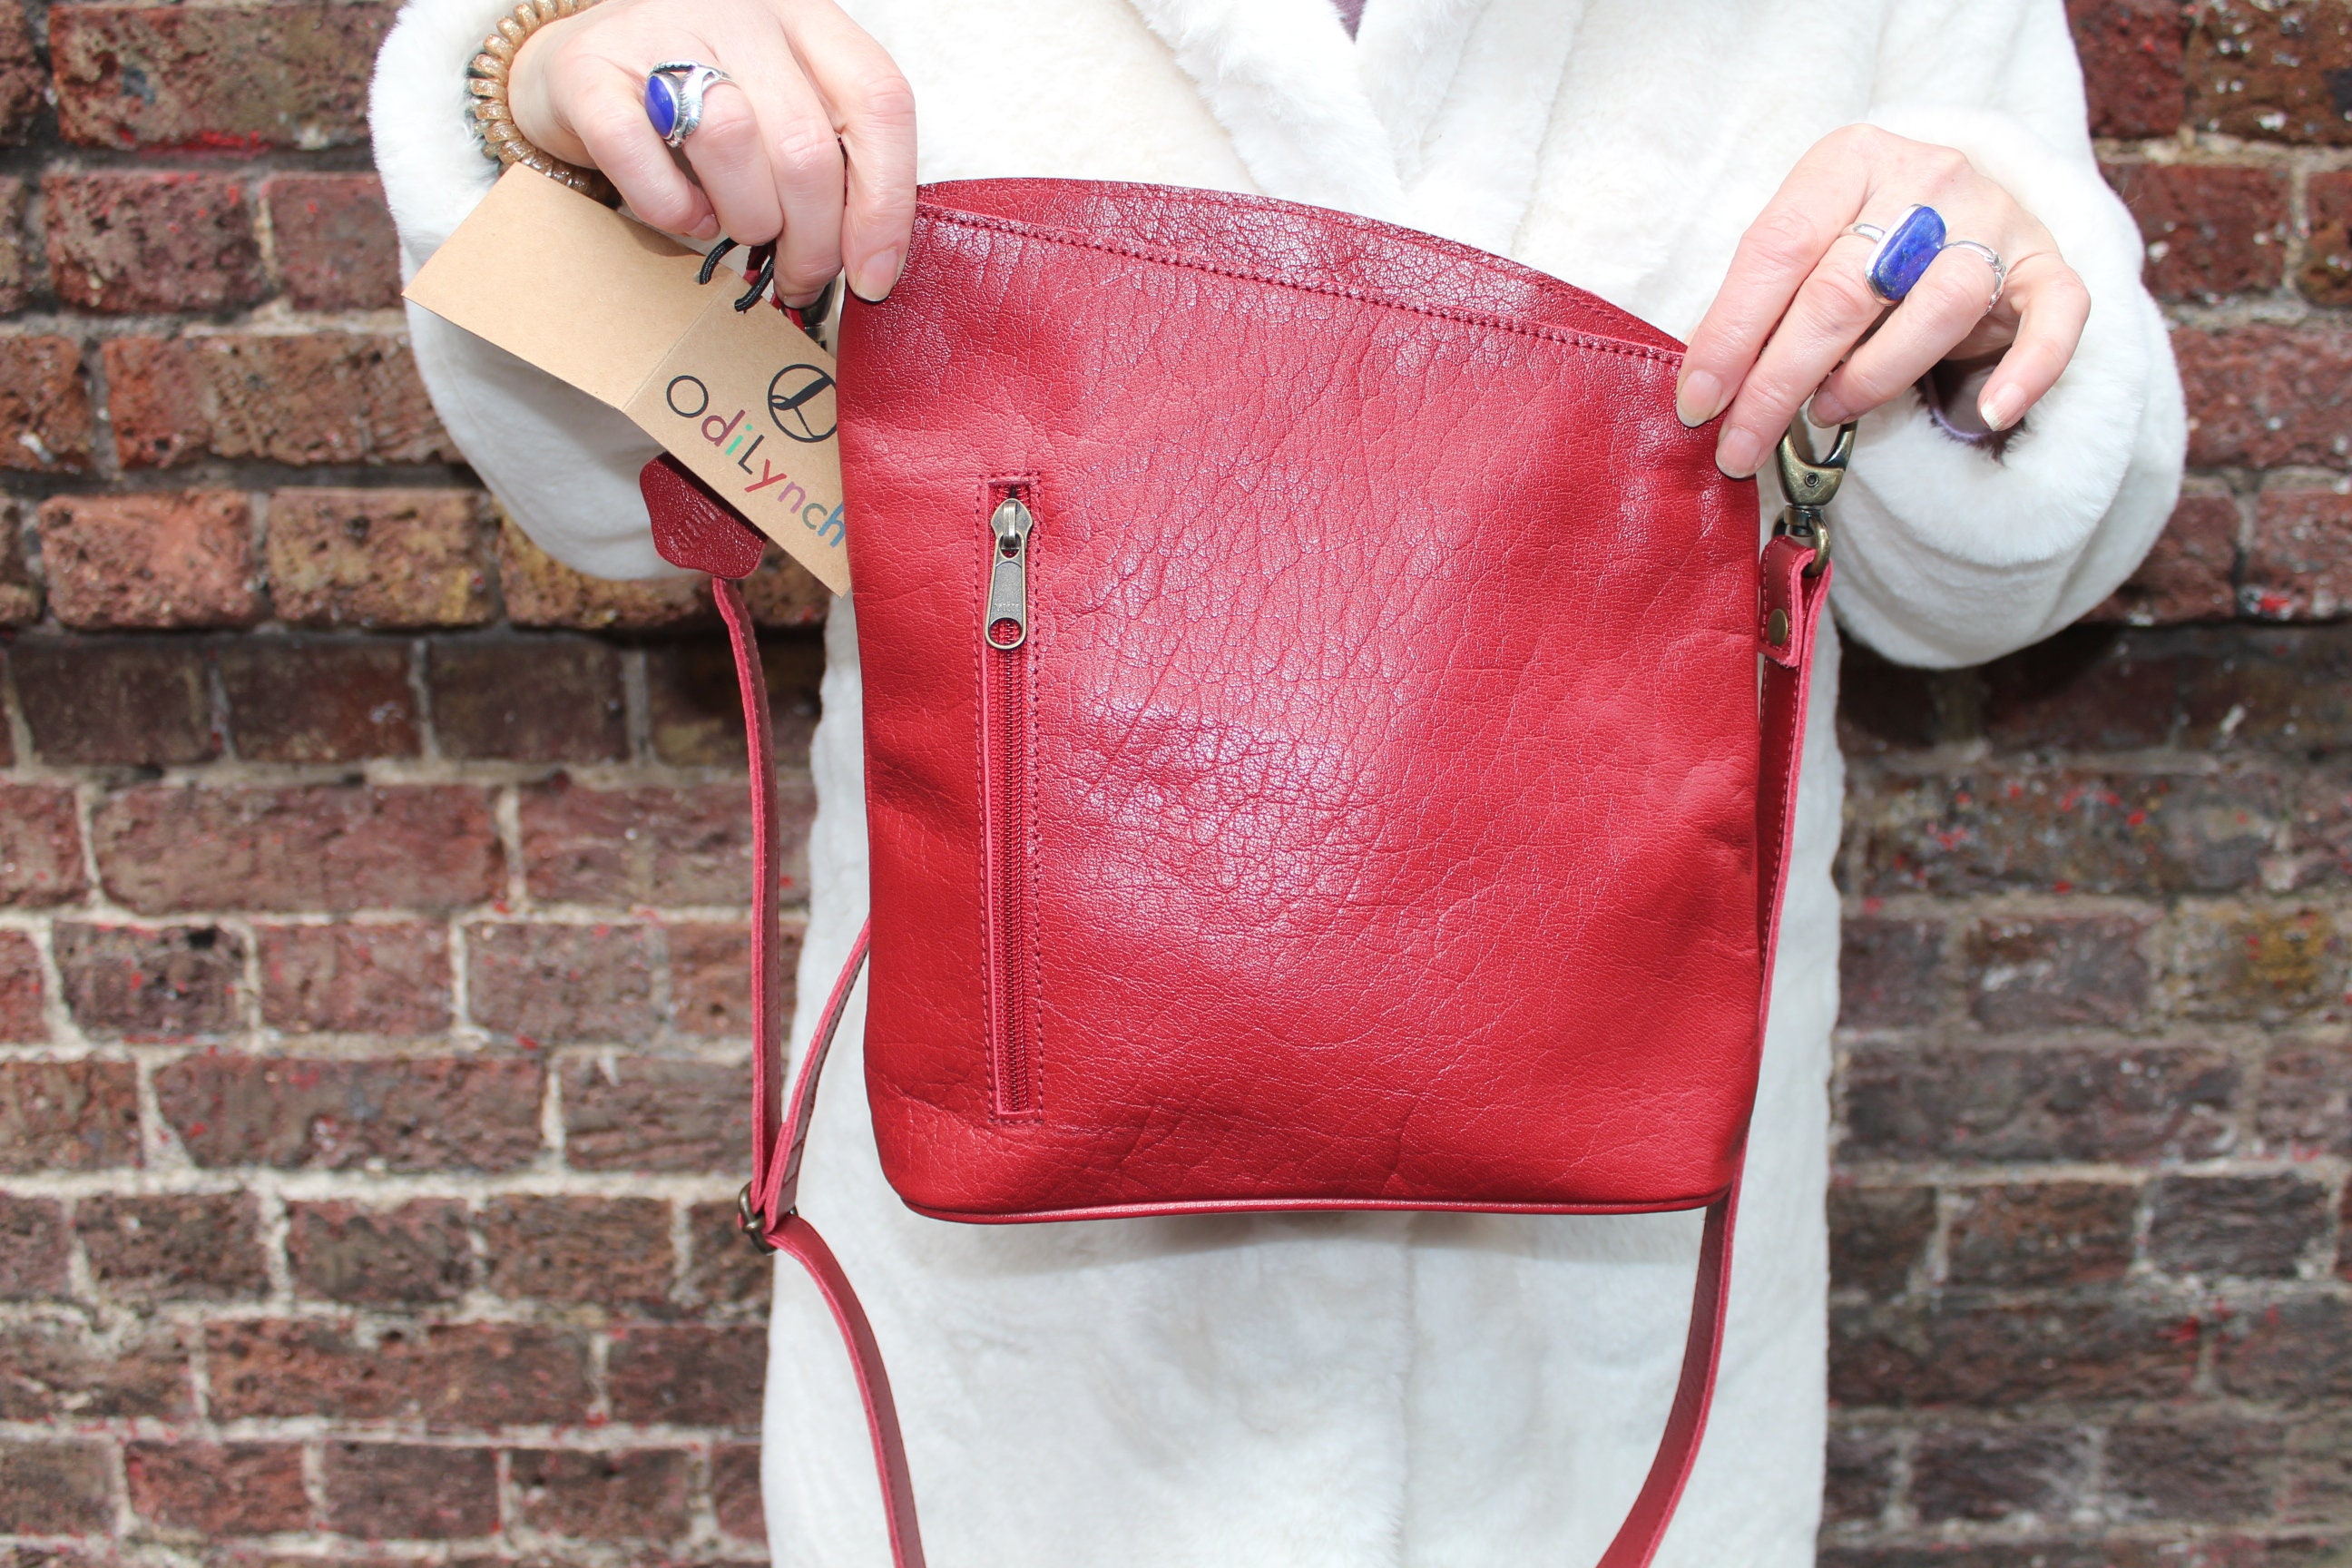 Simple Red Cross Body Zipped Bag Marina Bag Red Leather 